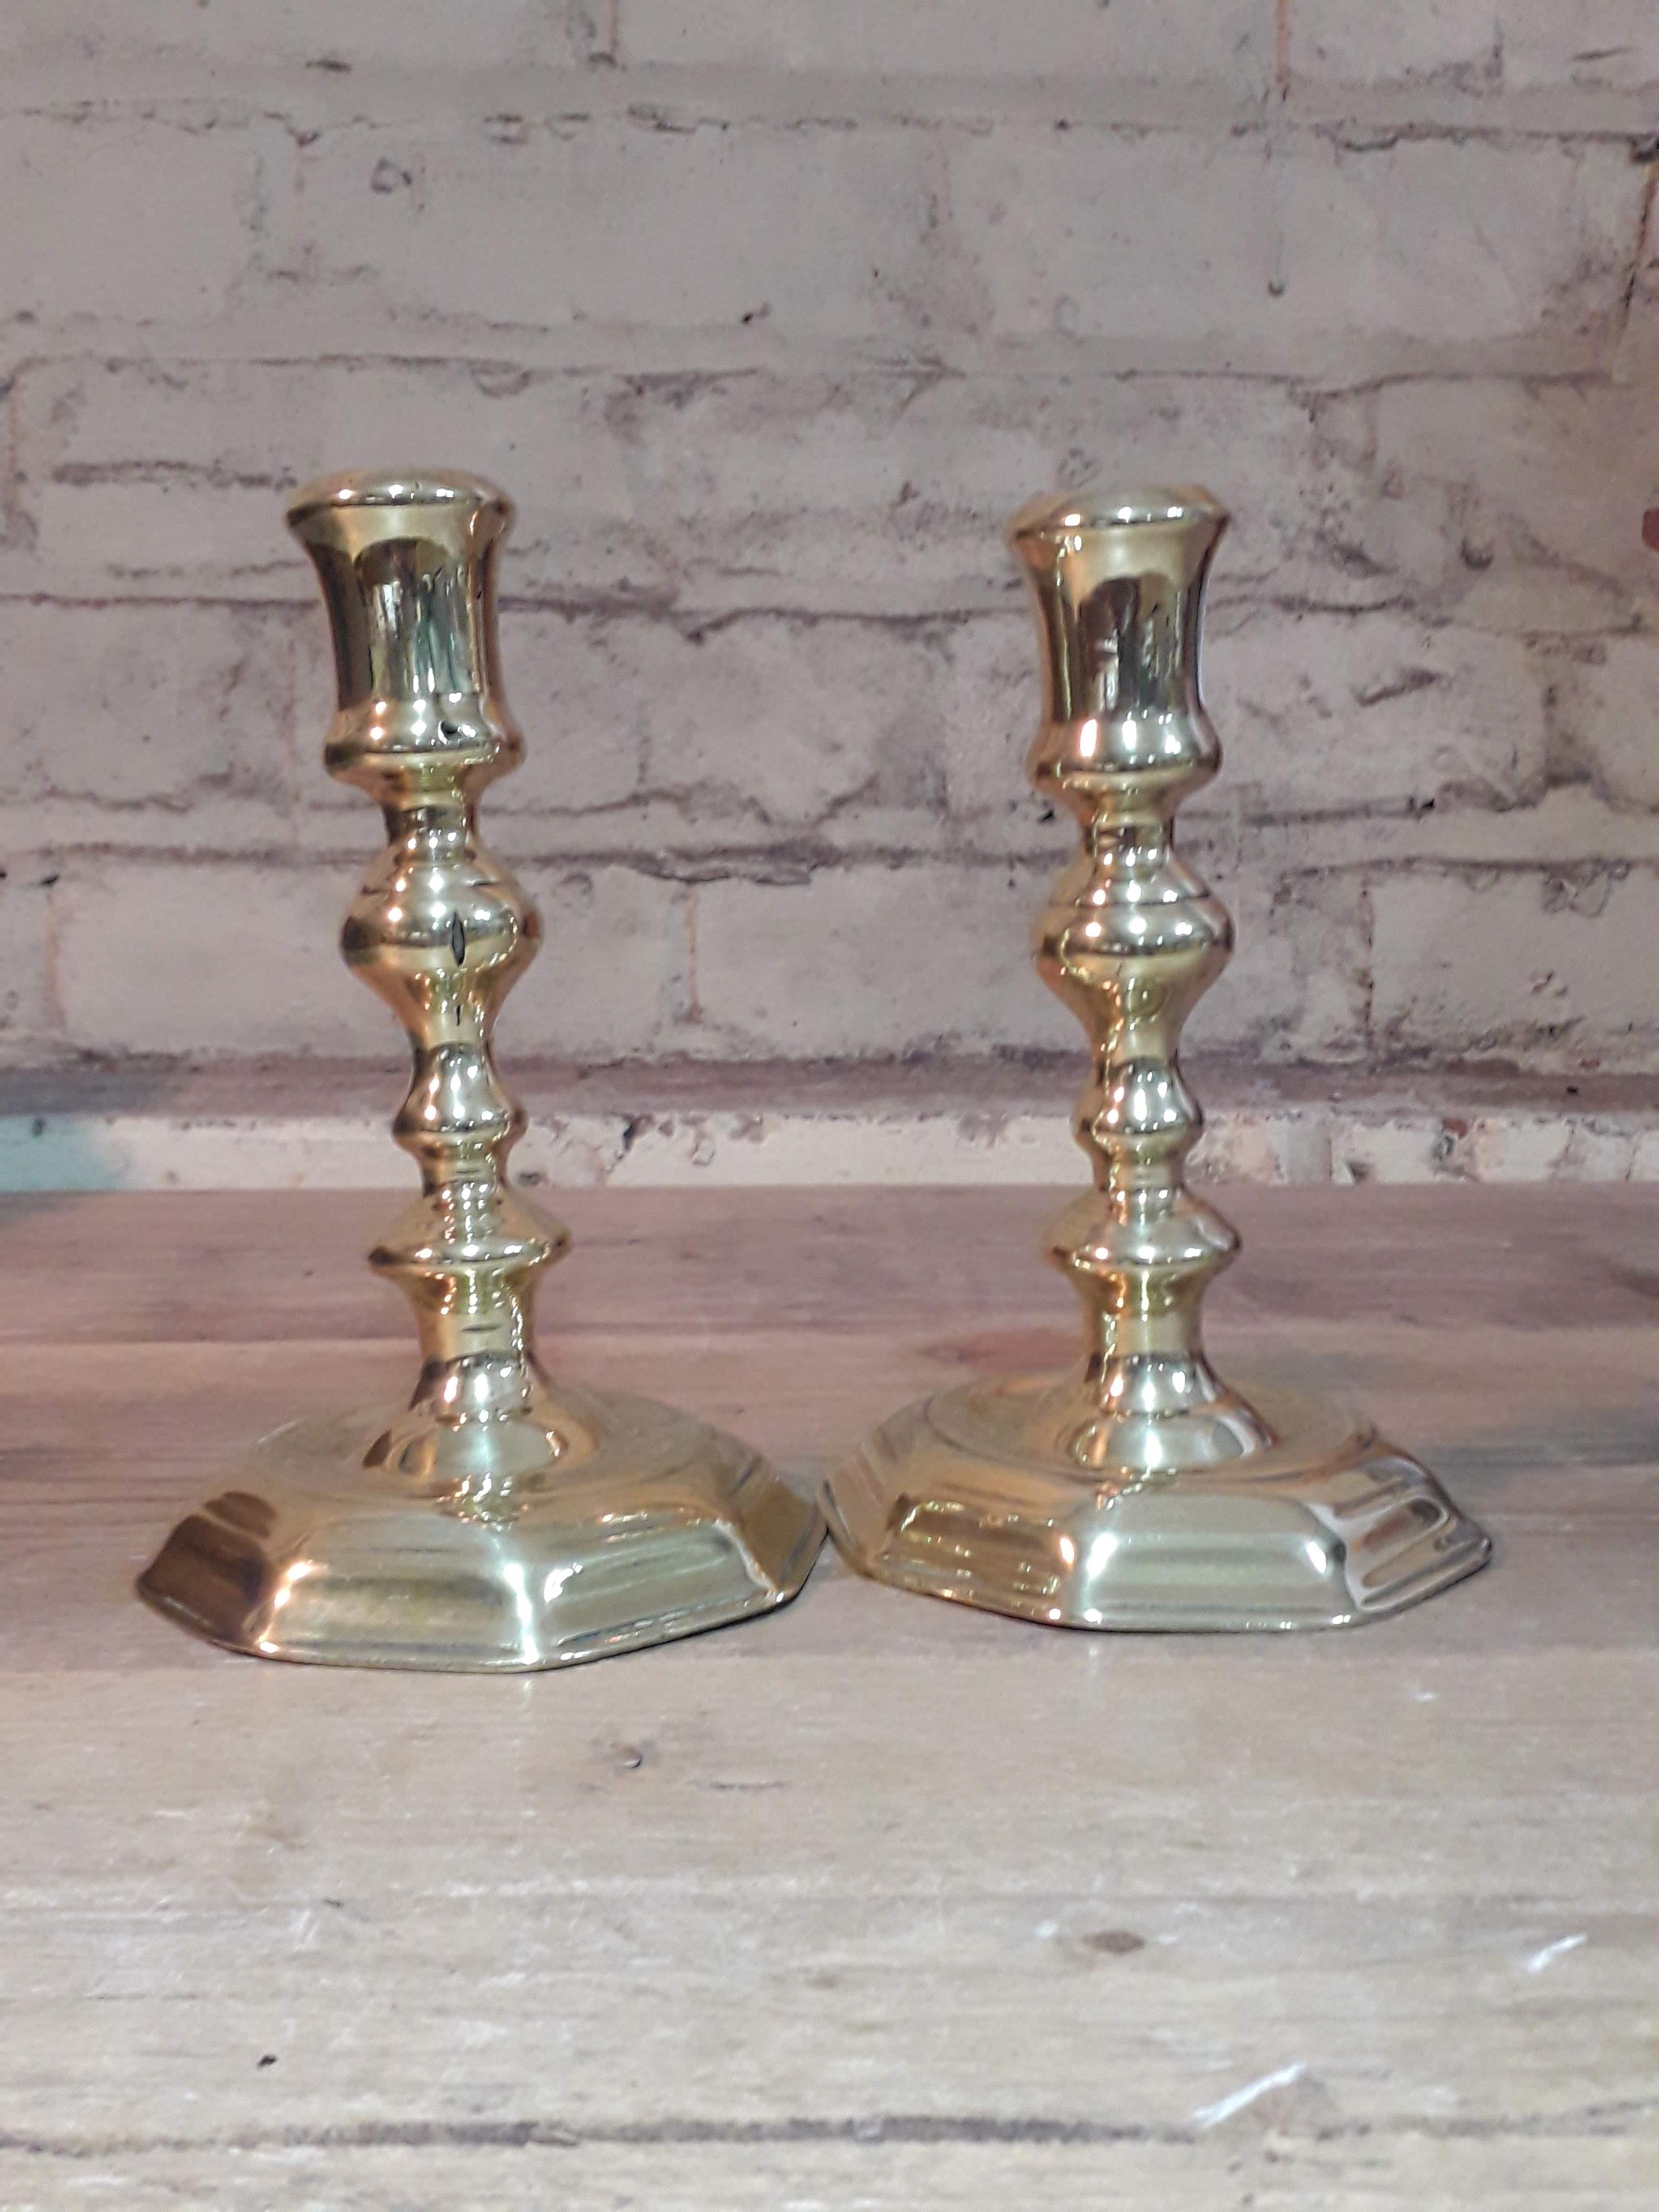 A pair brass candlesticks, heights 17cm. Condition: dents to both sticks. - Image 3 of 5